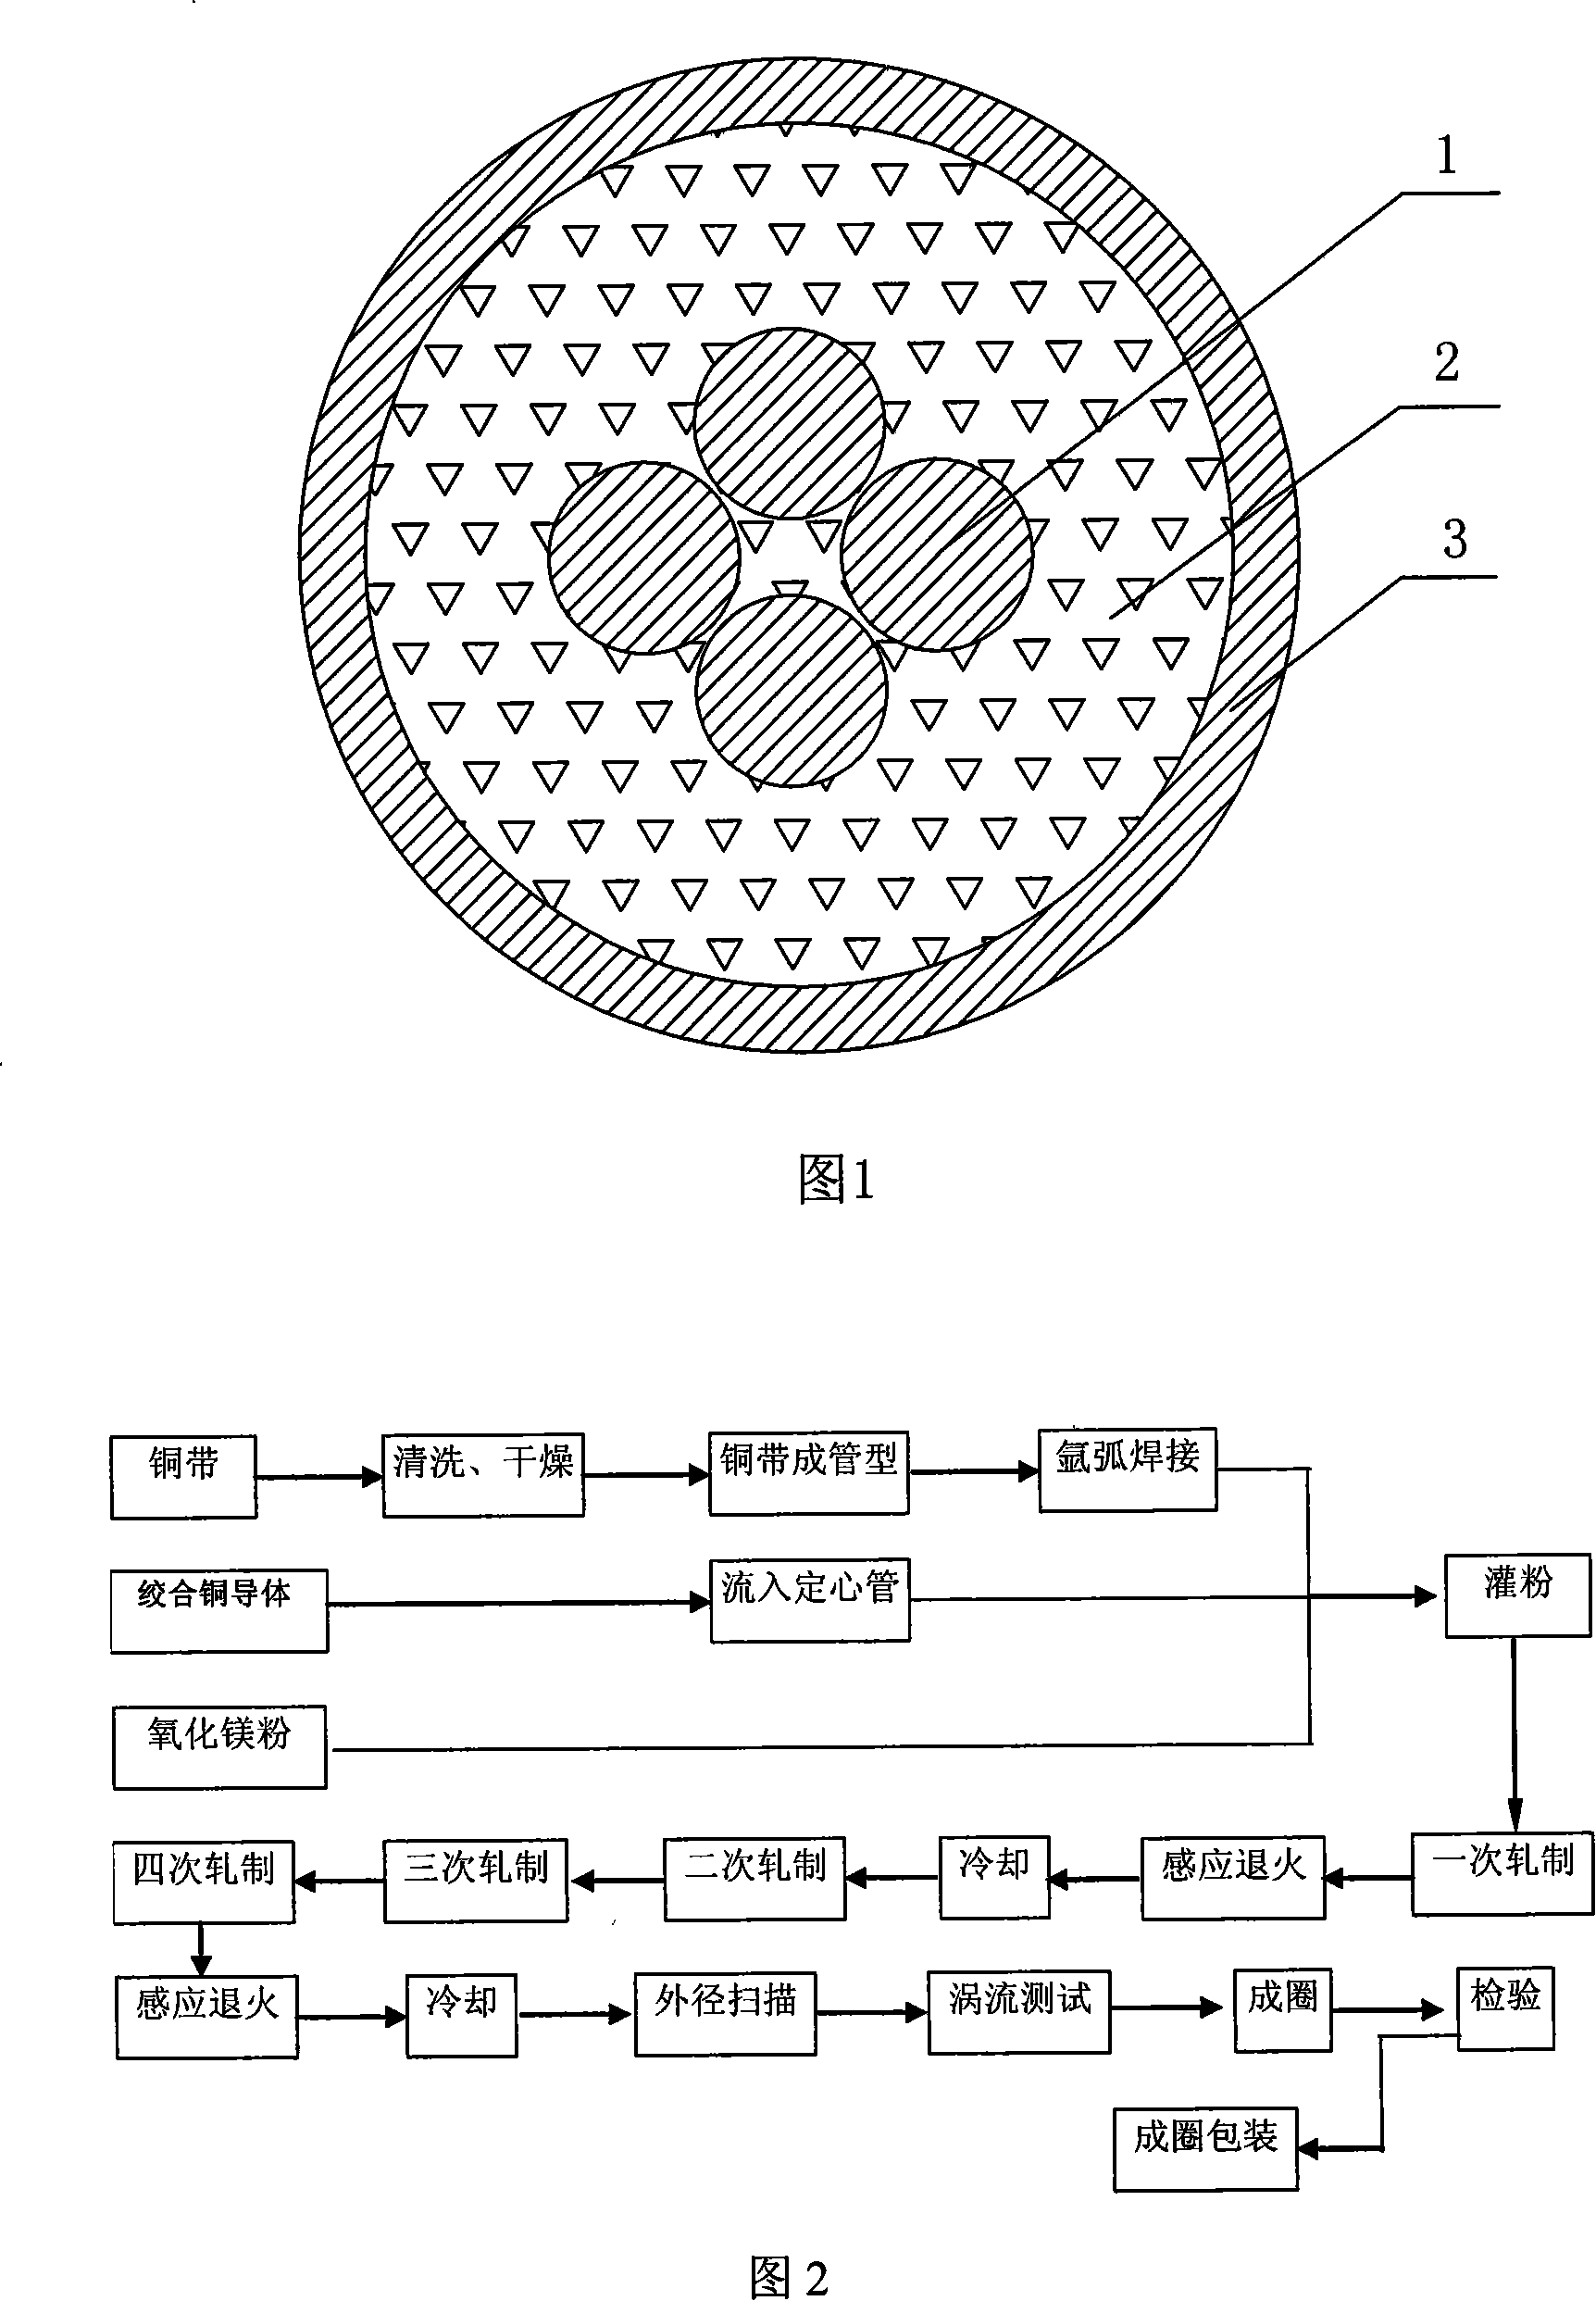 Mineral insulation signal cable and method for manufacturing the same